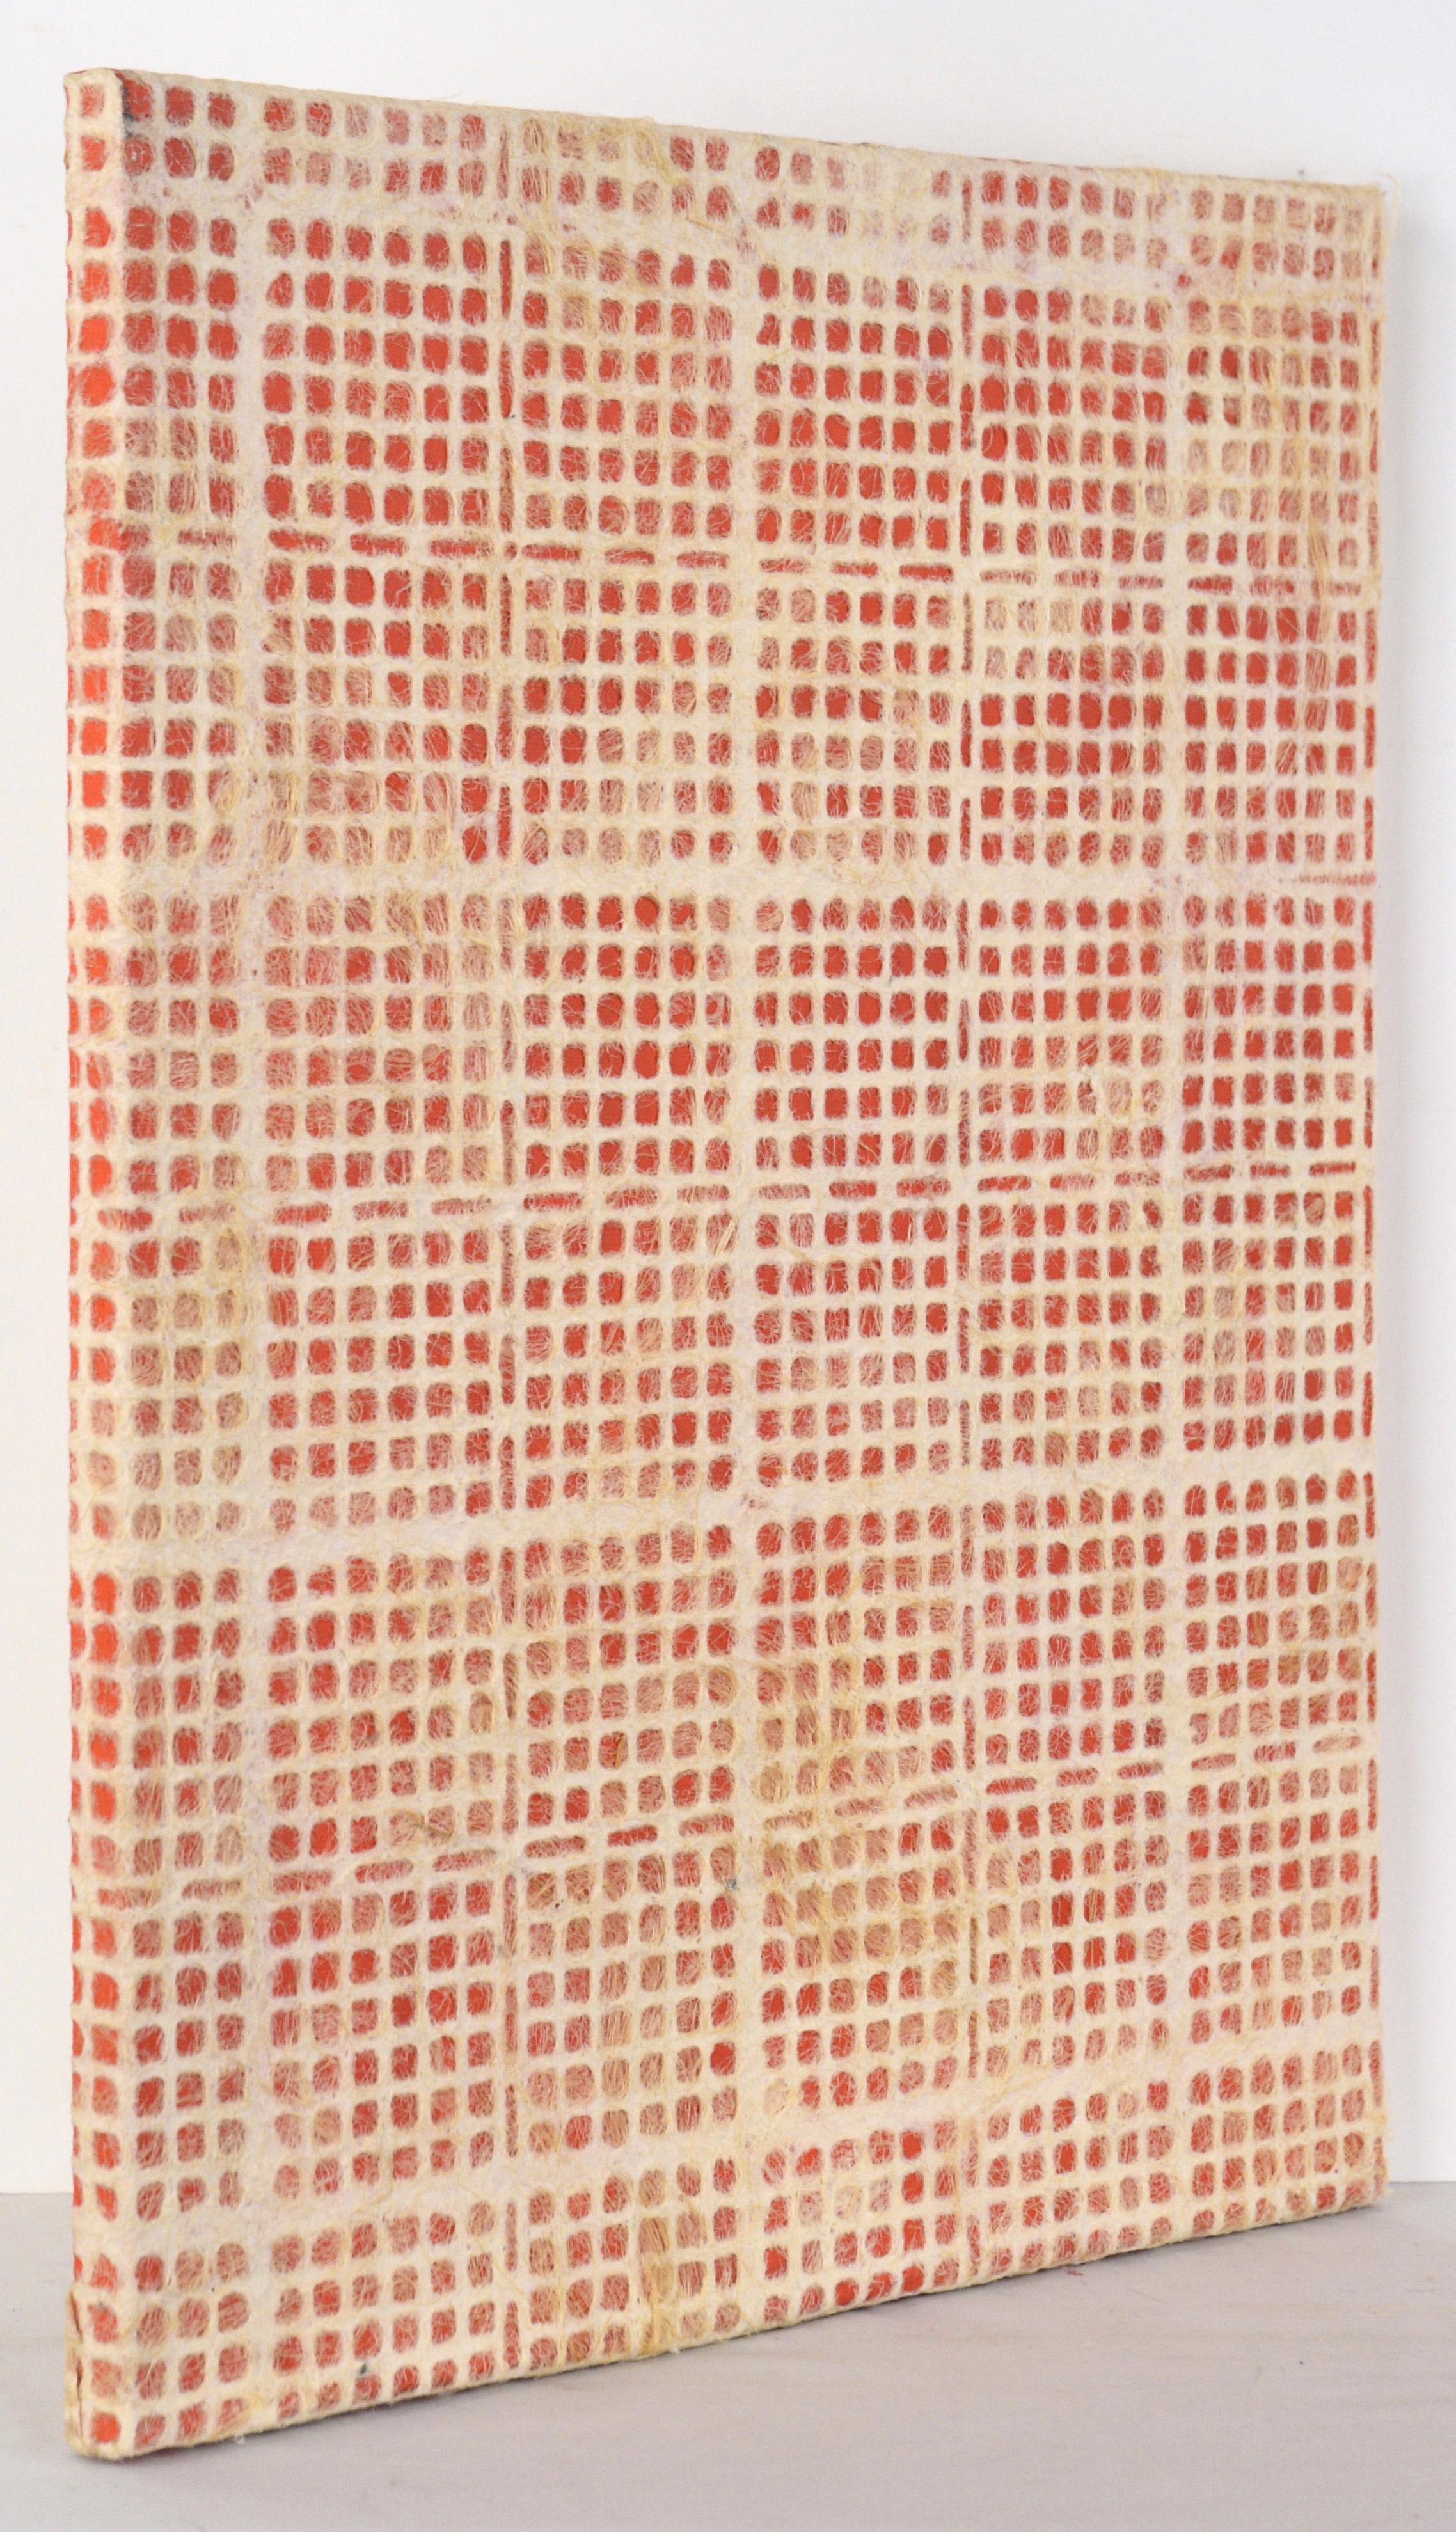 Abstract Geometric Composition with Paper, Fibers, and Acrylic on Canvas (Red) For Sale 2